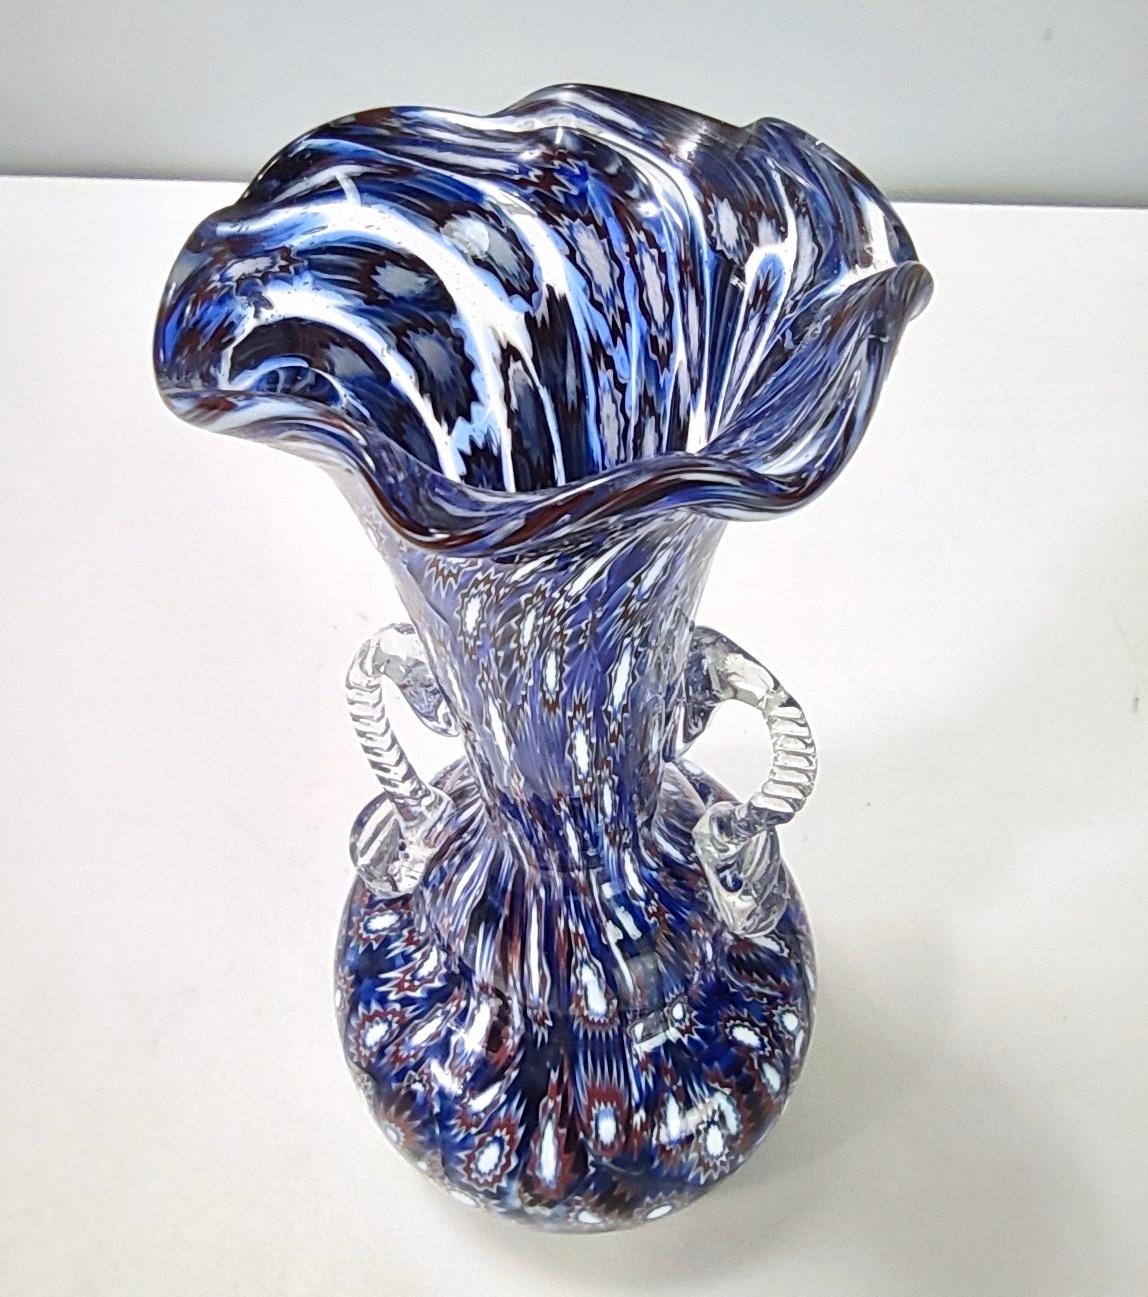 Mid-20th Century Vintage Blue Murano Glass Vase Ascribable to Fratelli Toso with Murrines, Italy For Sale